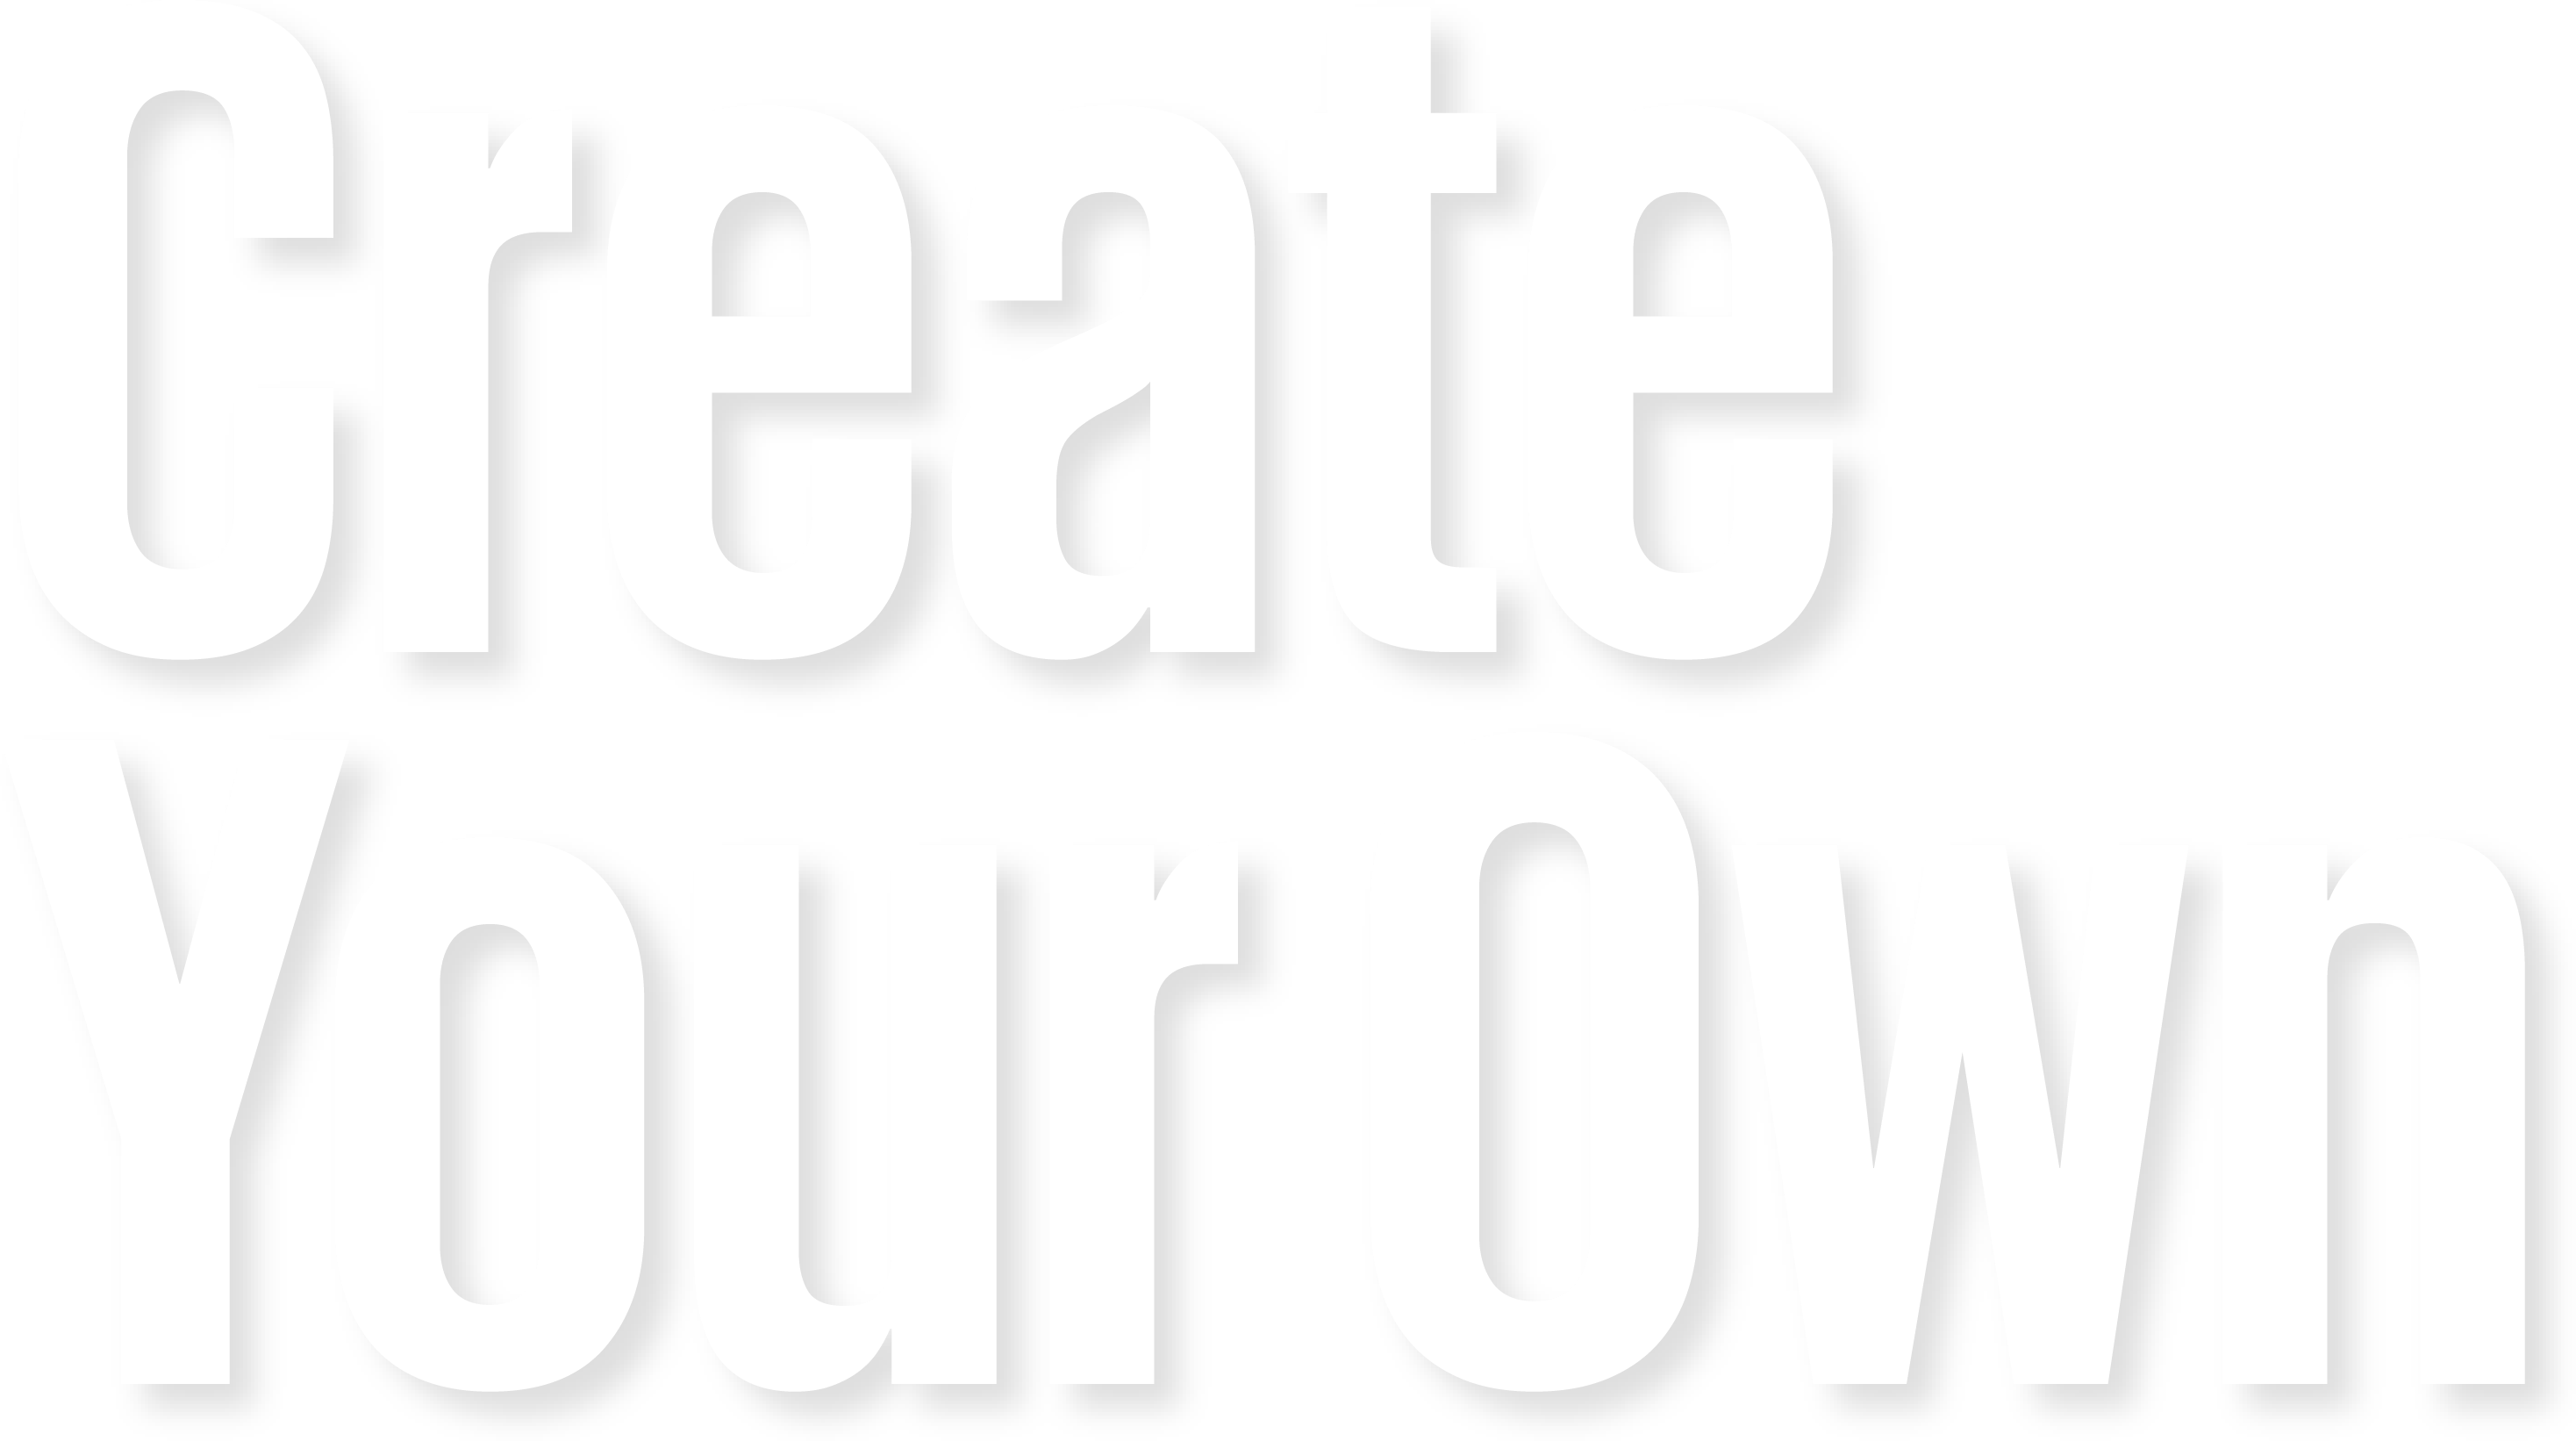 Text: Create your own